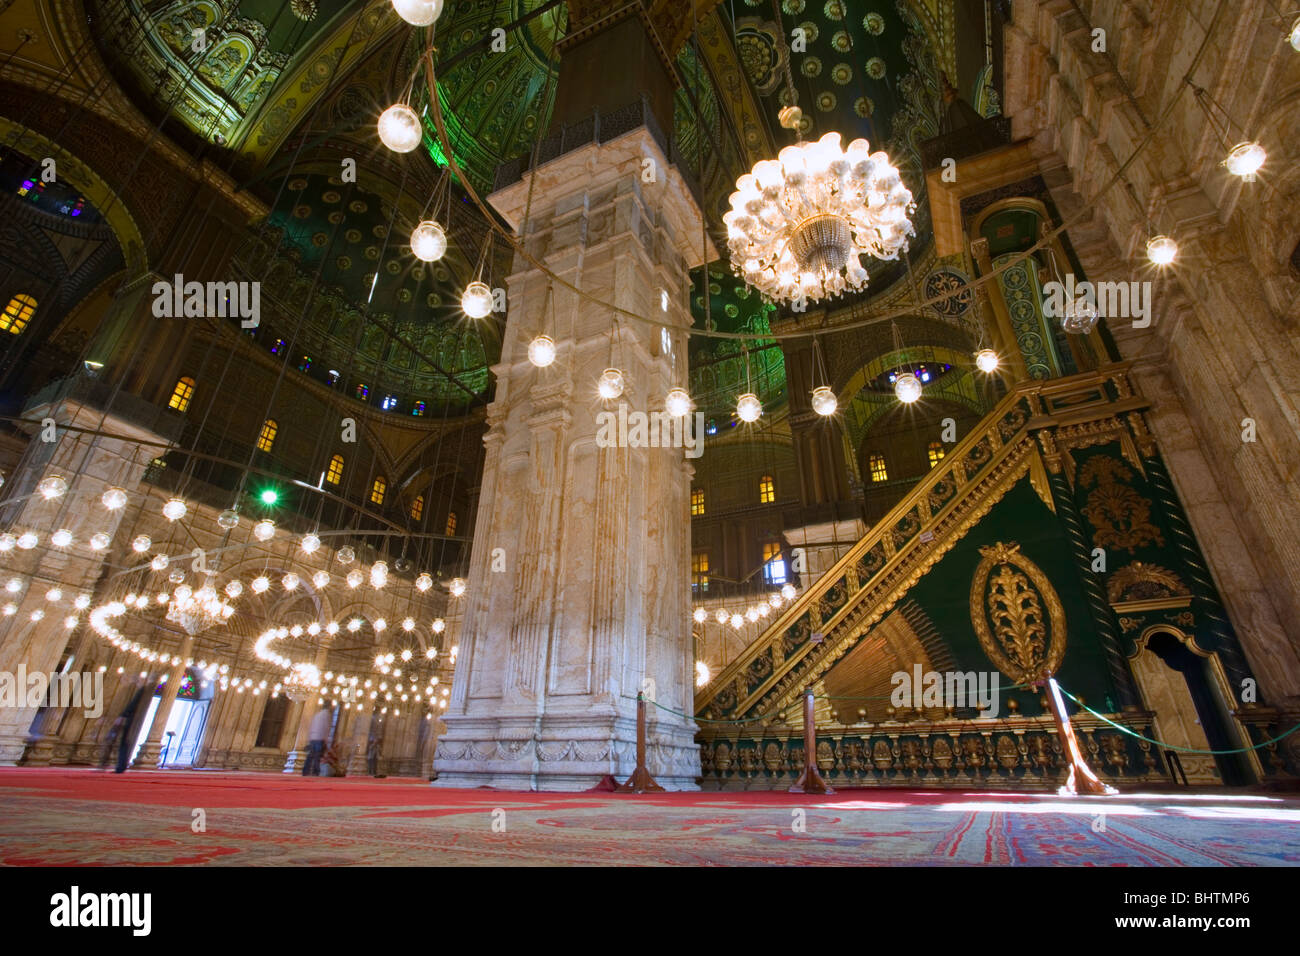 Mohamed Ali Mosque interior in the Saladin Citadel of Cairo, Egypt. Stock Photo